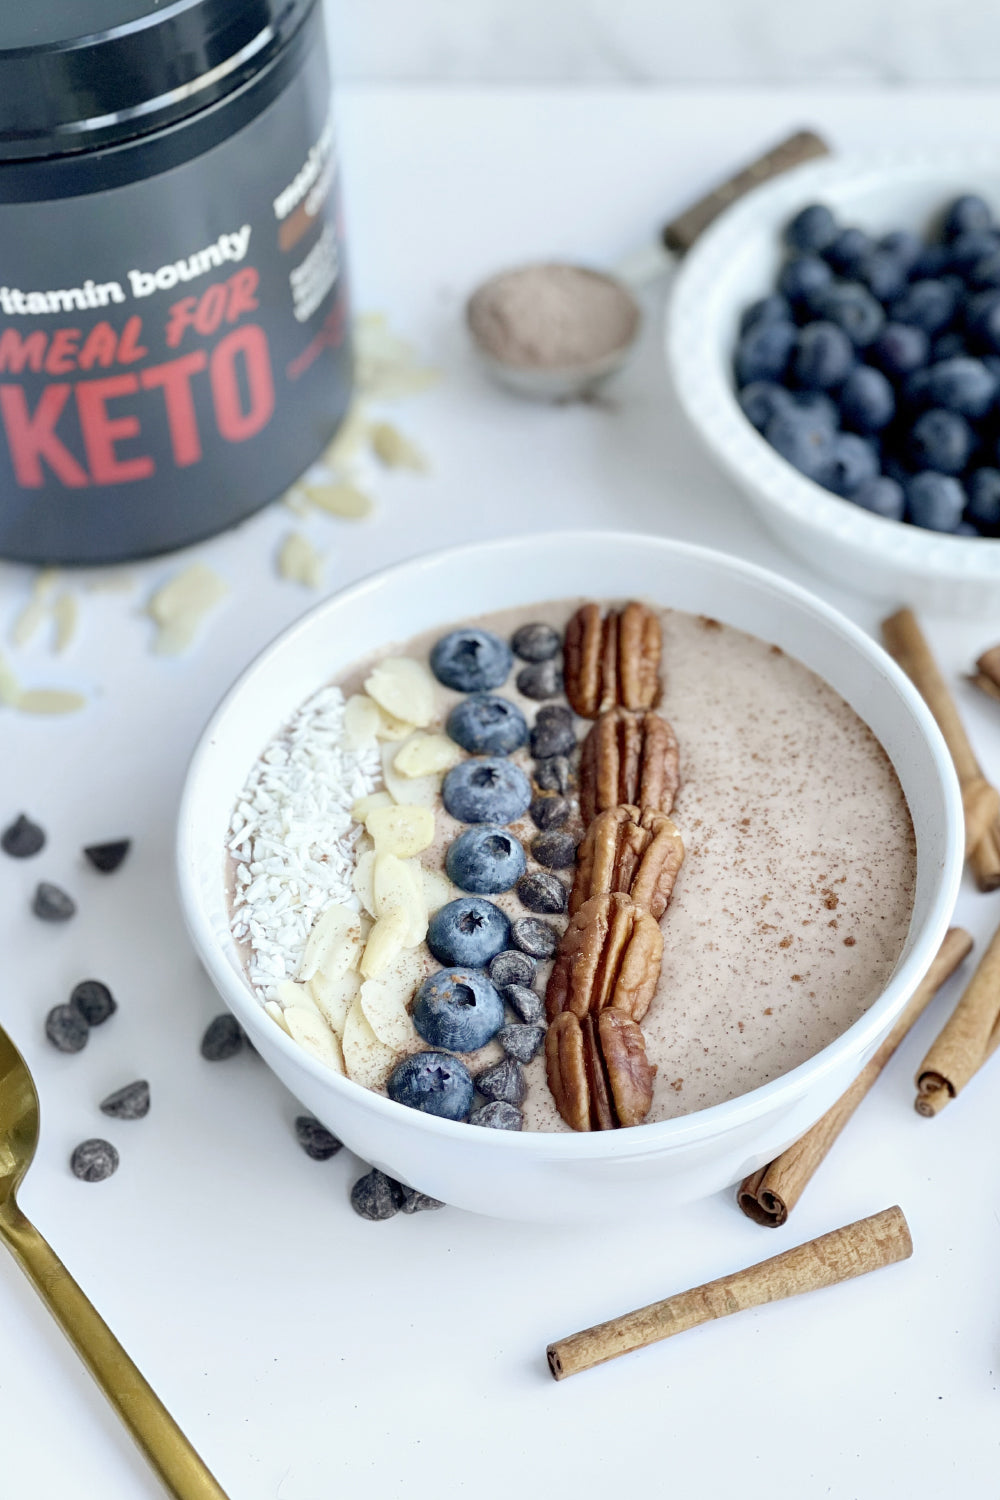 Meal for Keto Smoothie Bowl